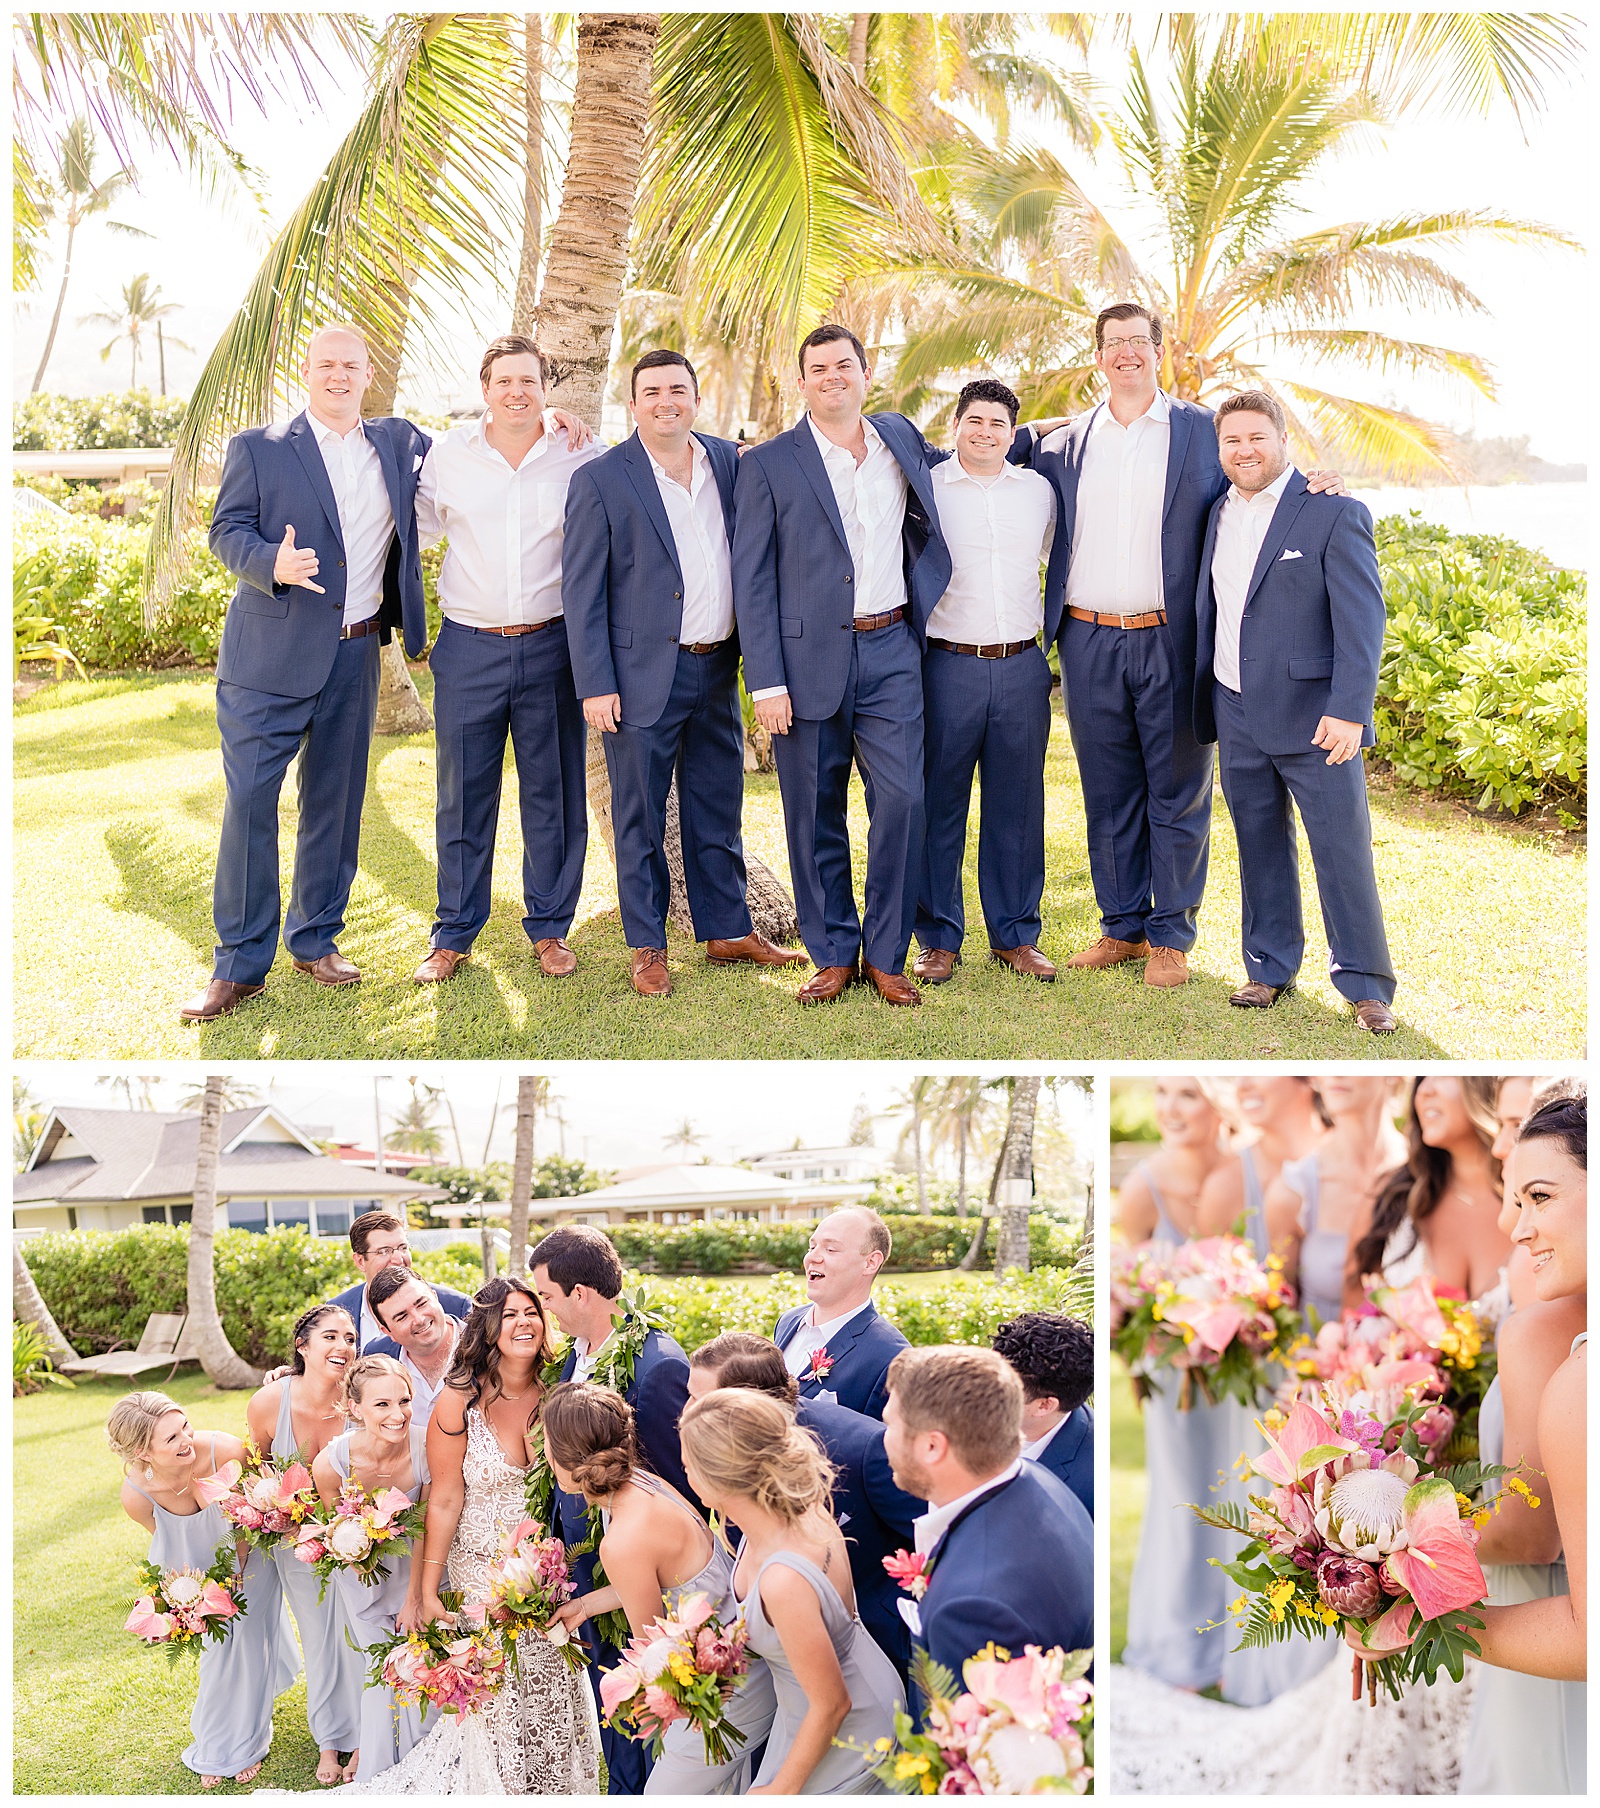 Wedding party laughing together Oahu wedding day